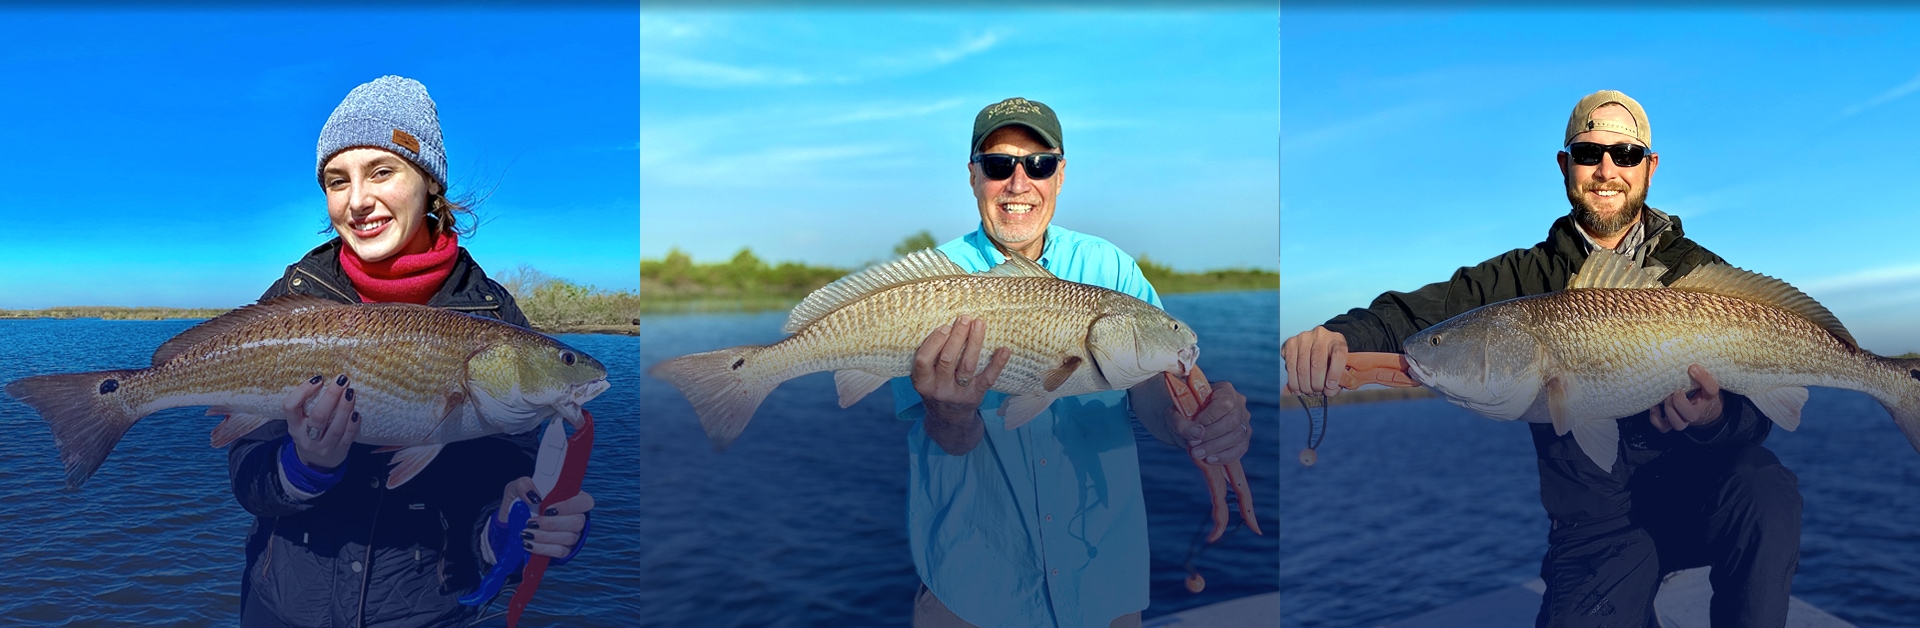 Red Drum fish caught in Delacroix on fishing charter